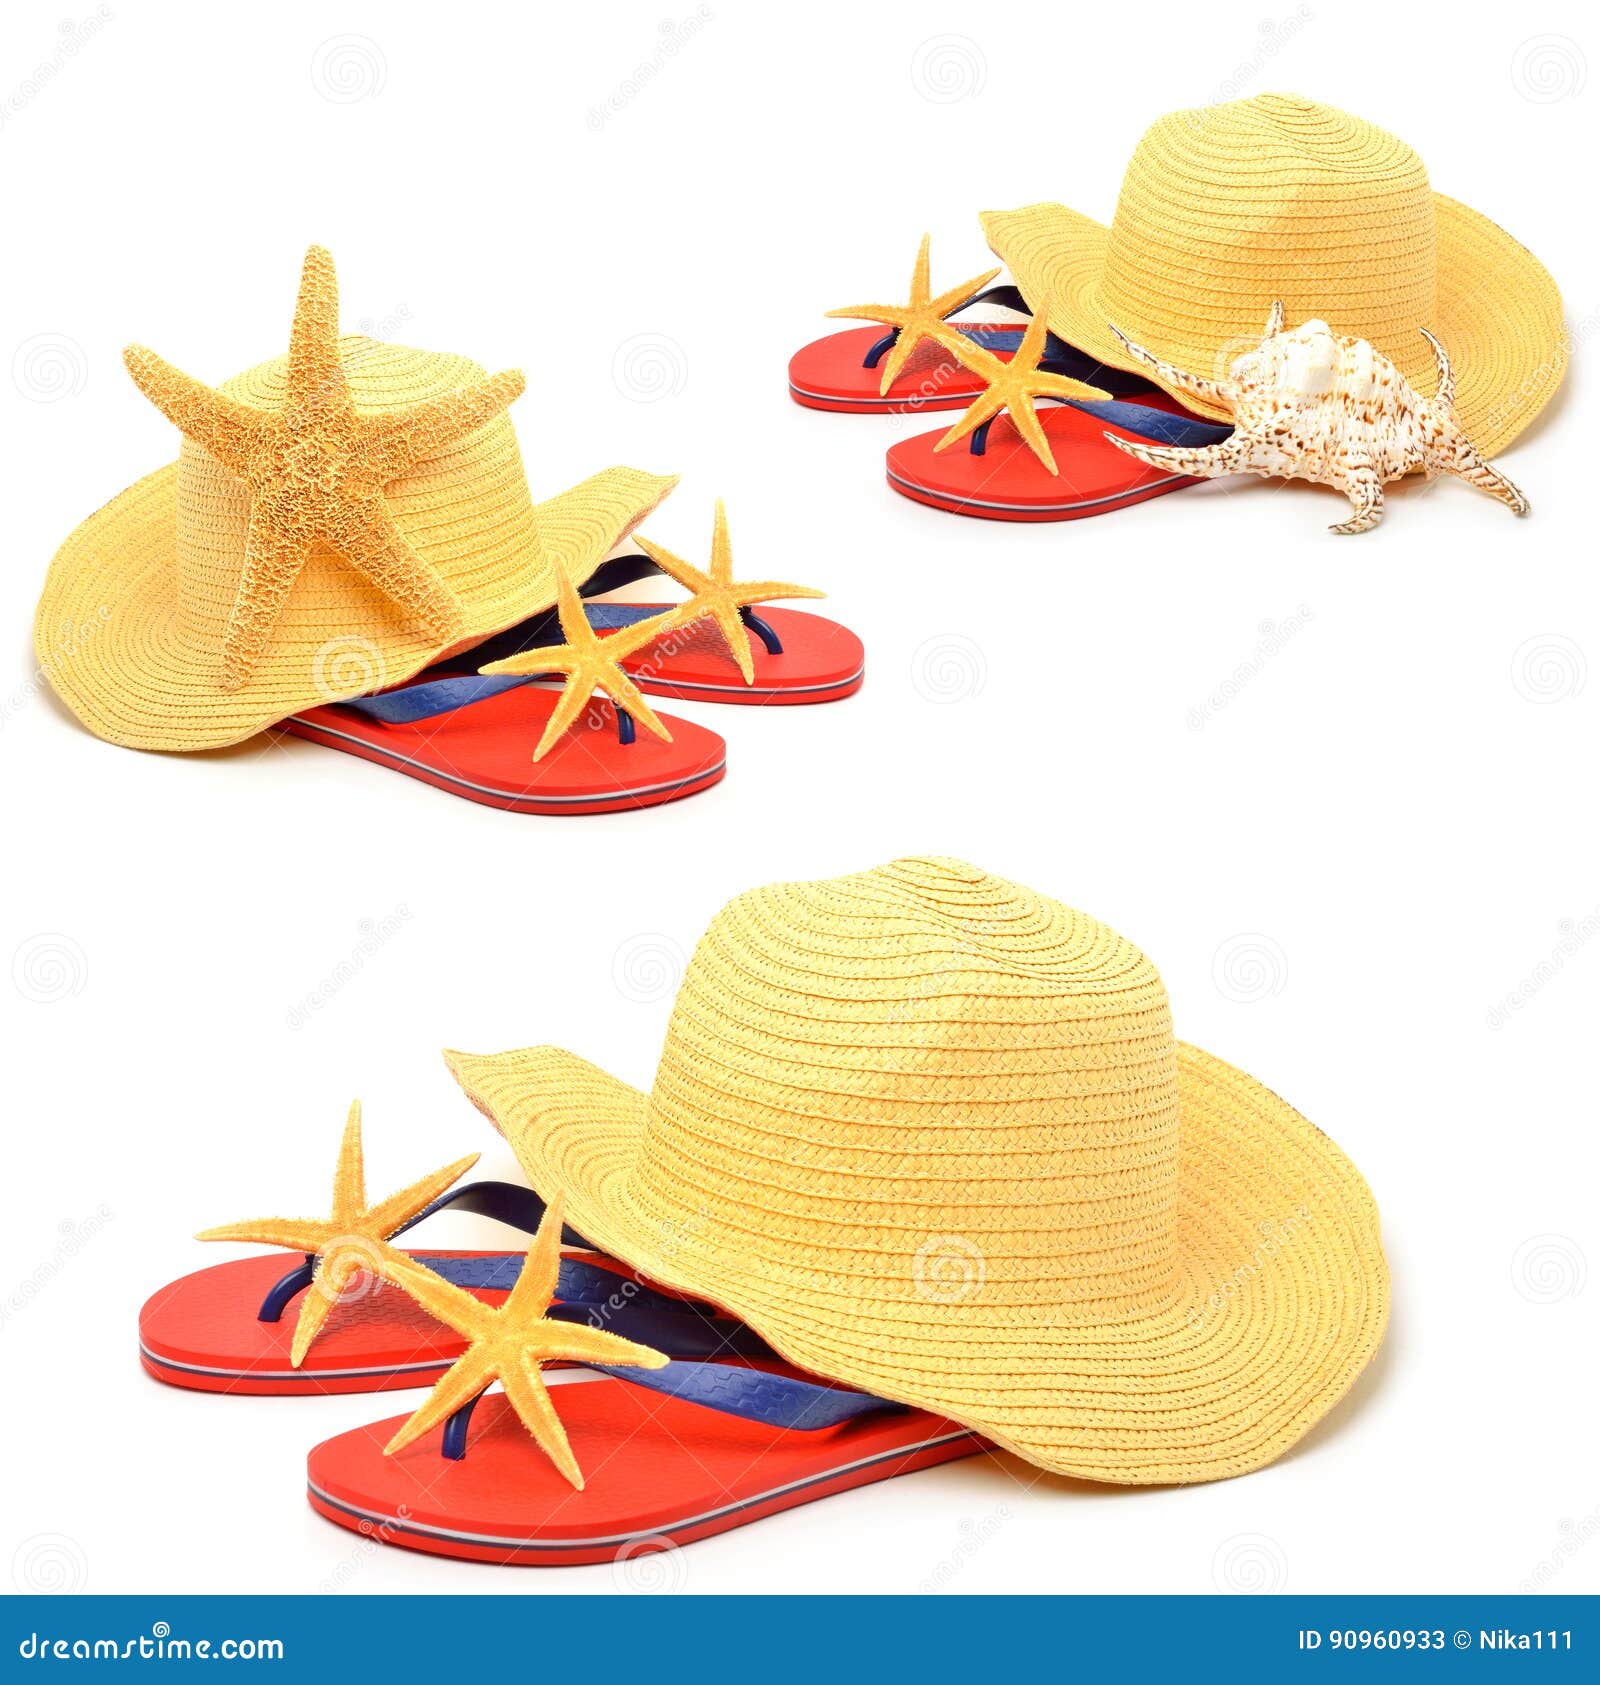 flip flops with starfishes.